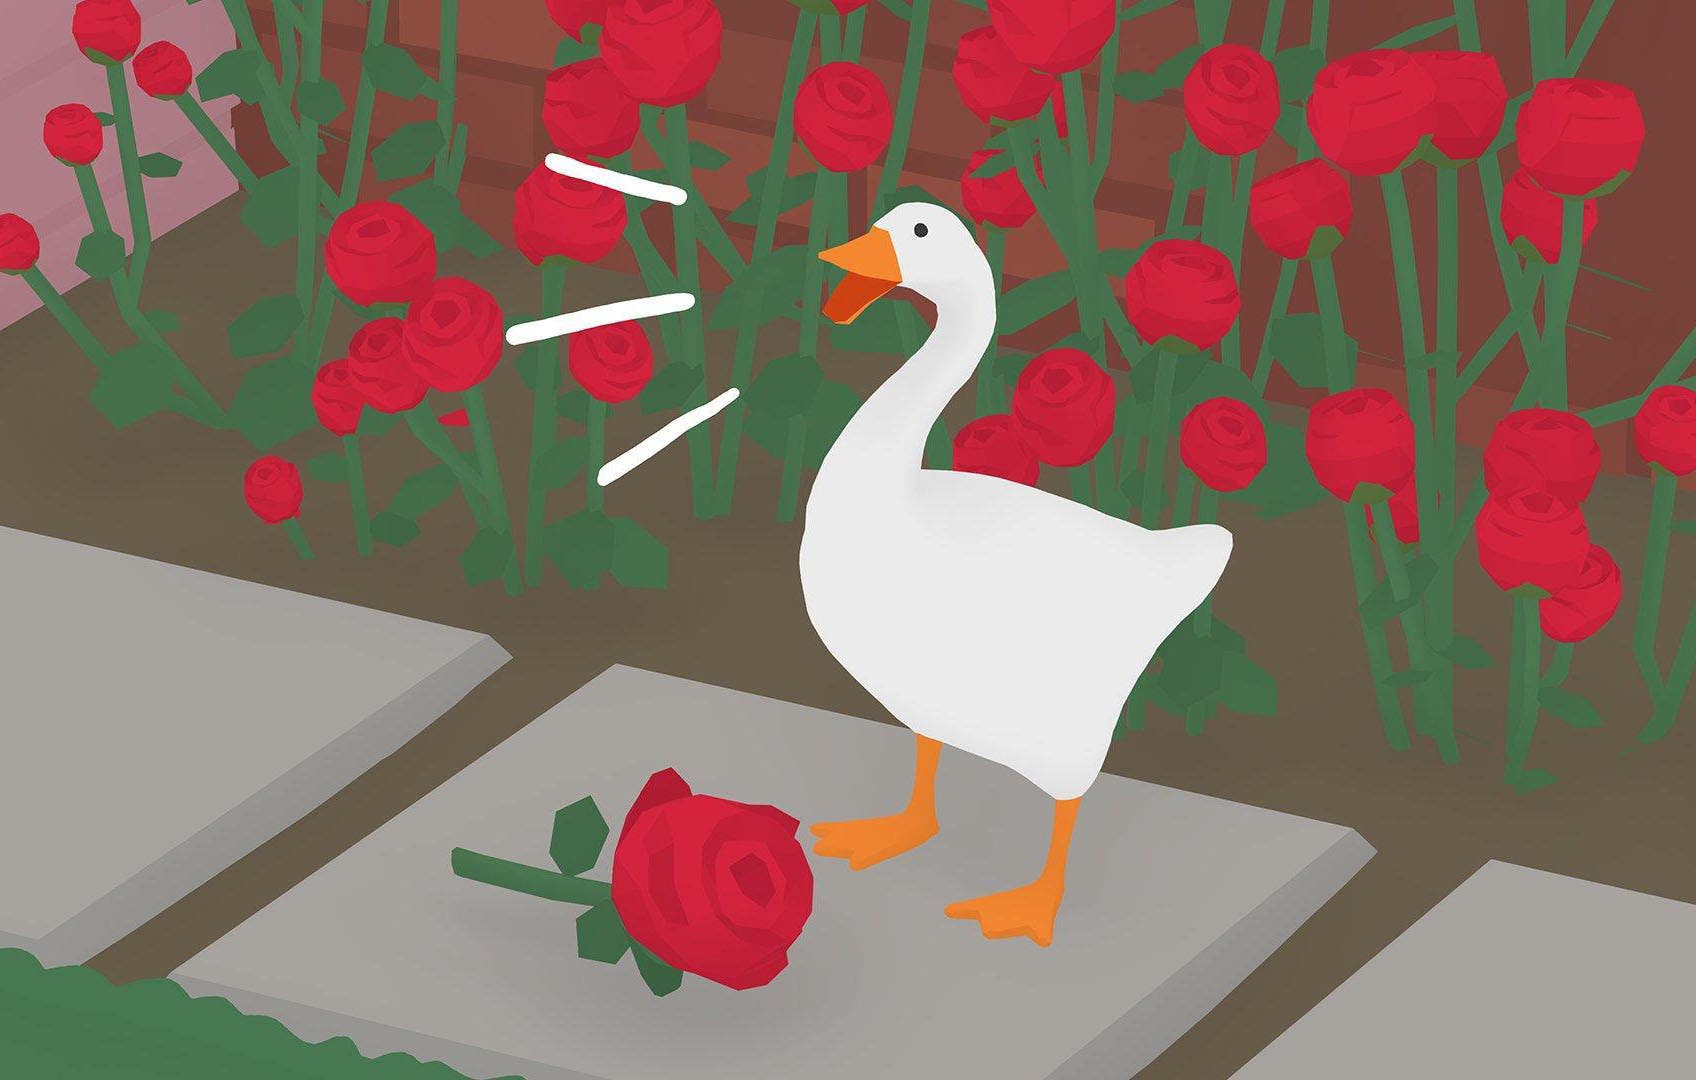 how to make someone prune the prize rose